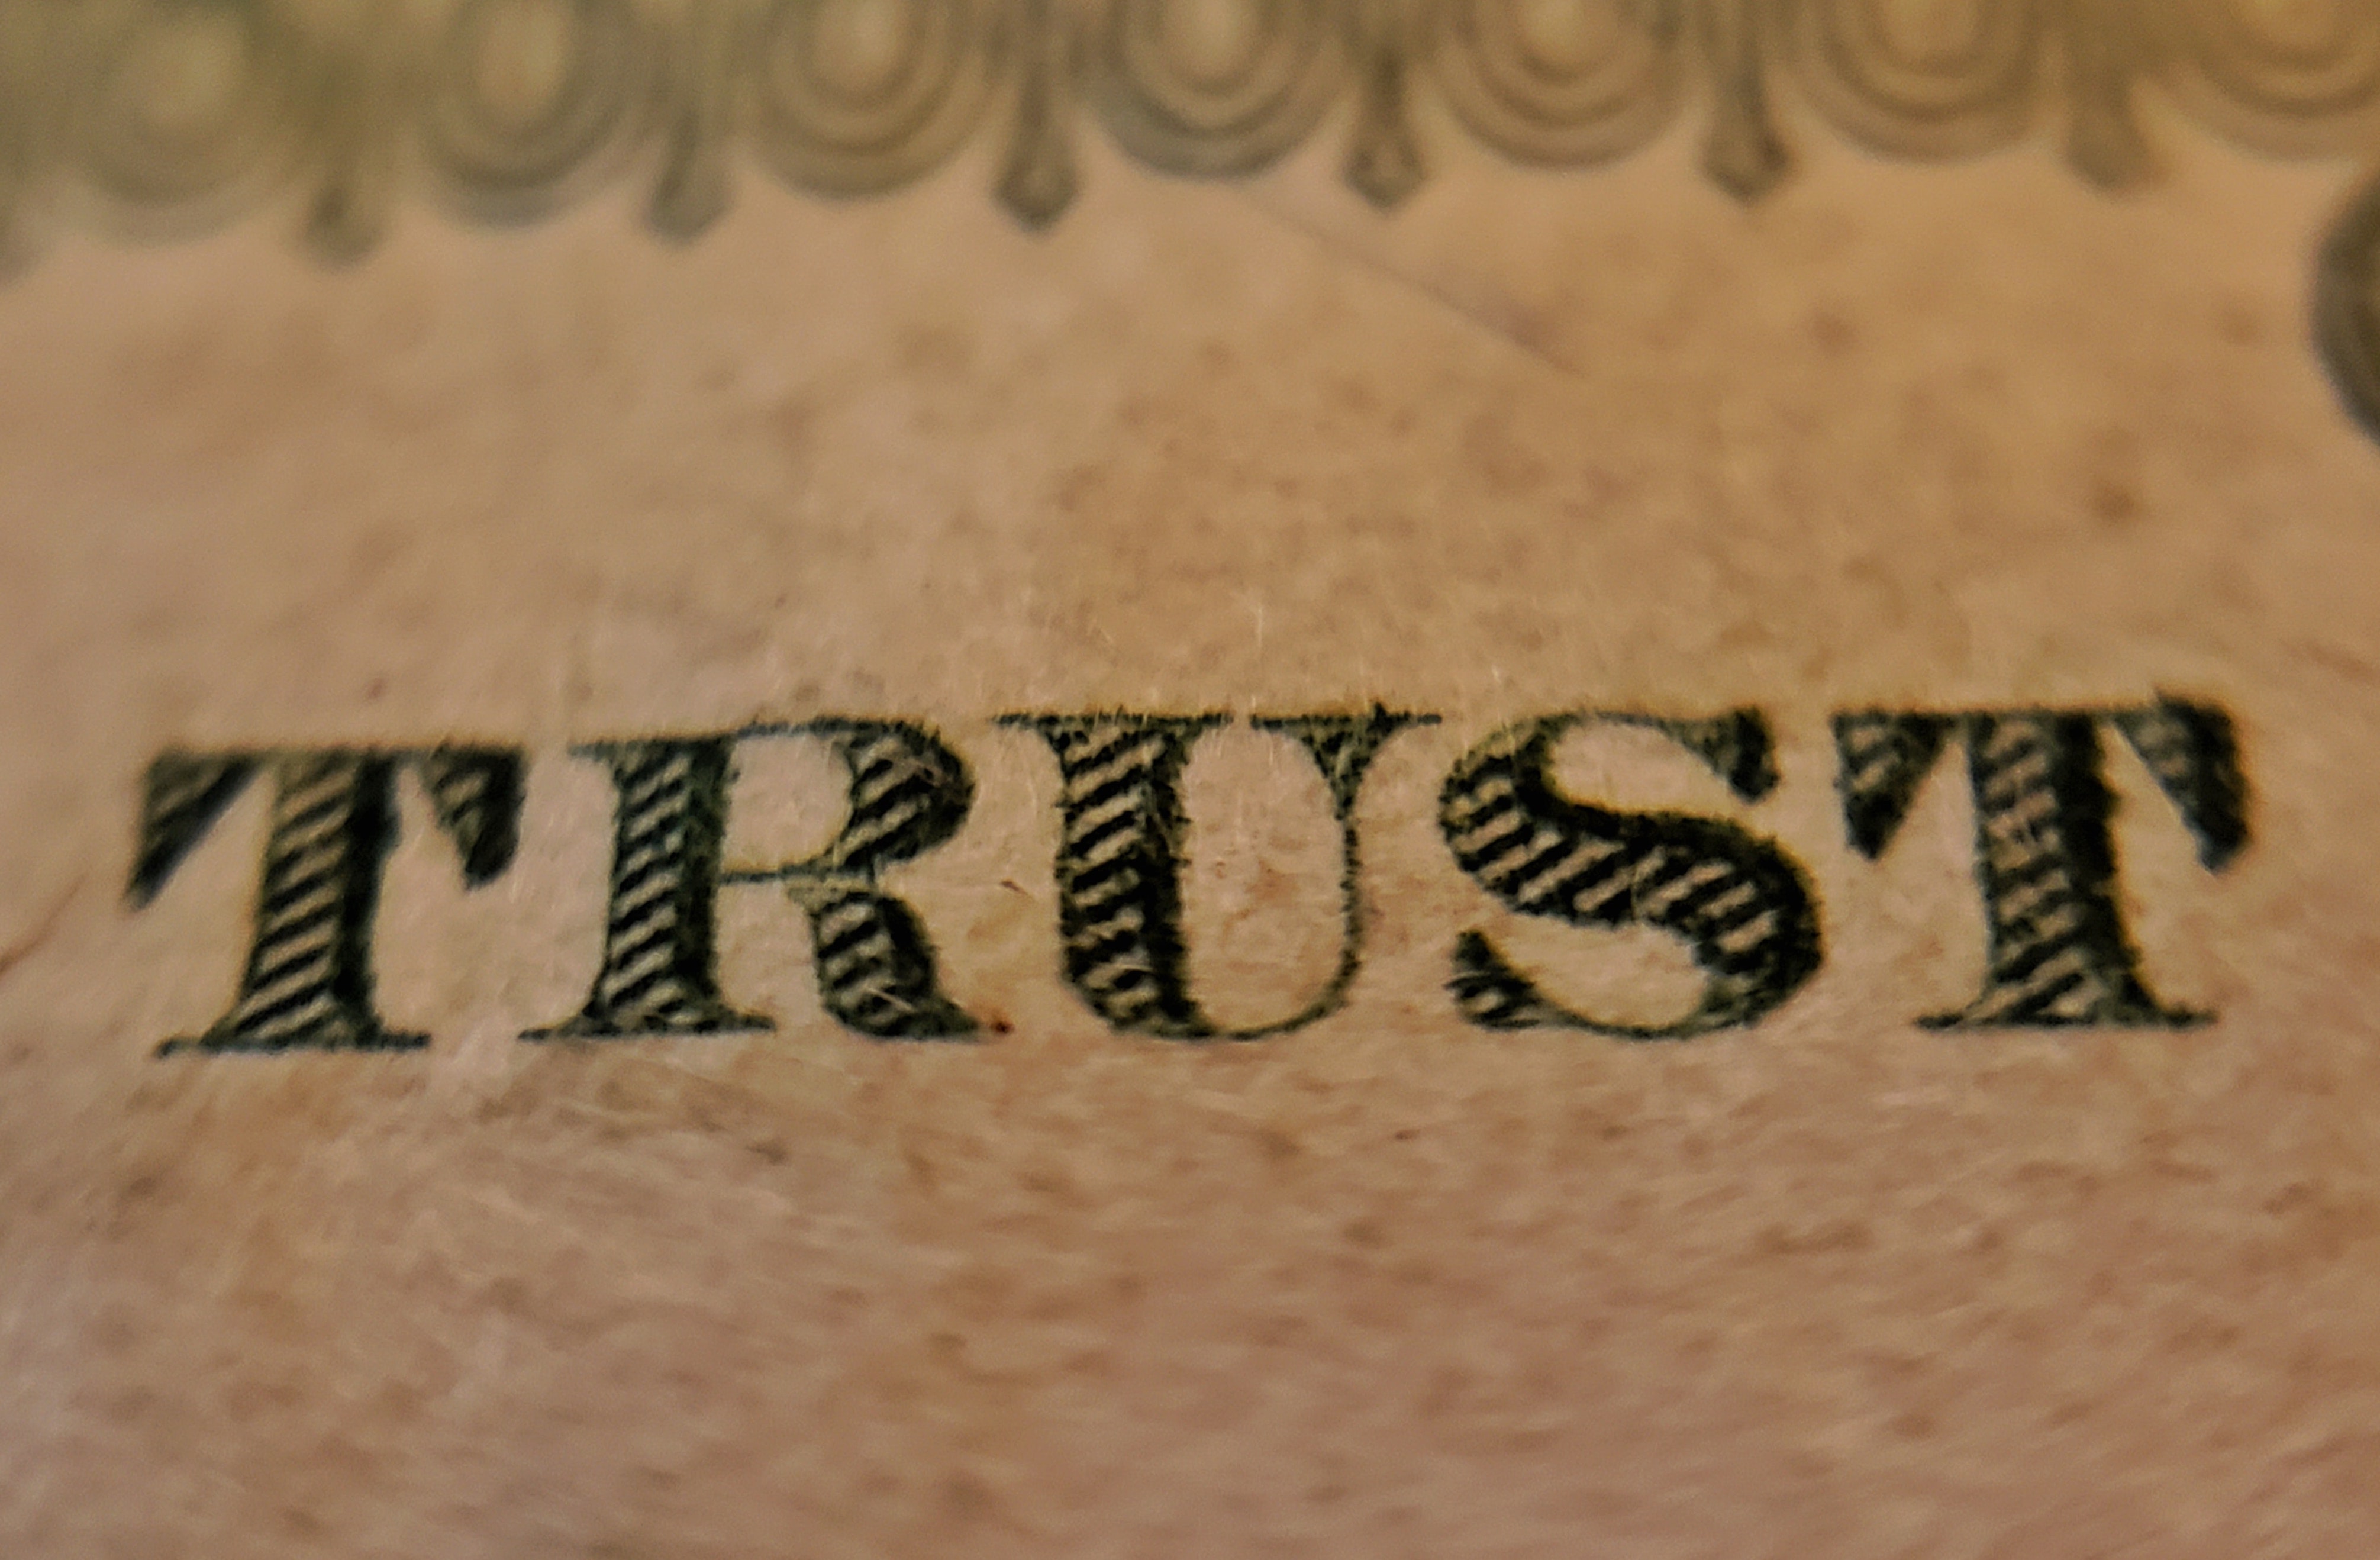 Trust. It’s your most valuable currency.